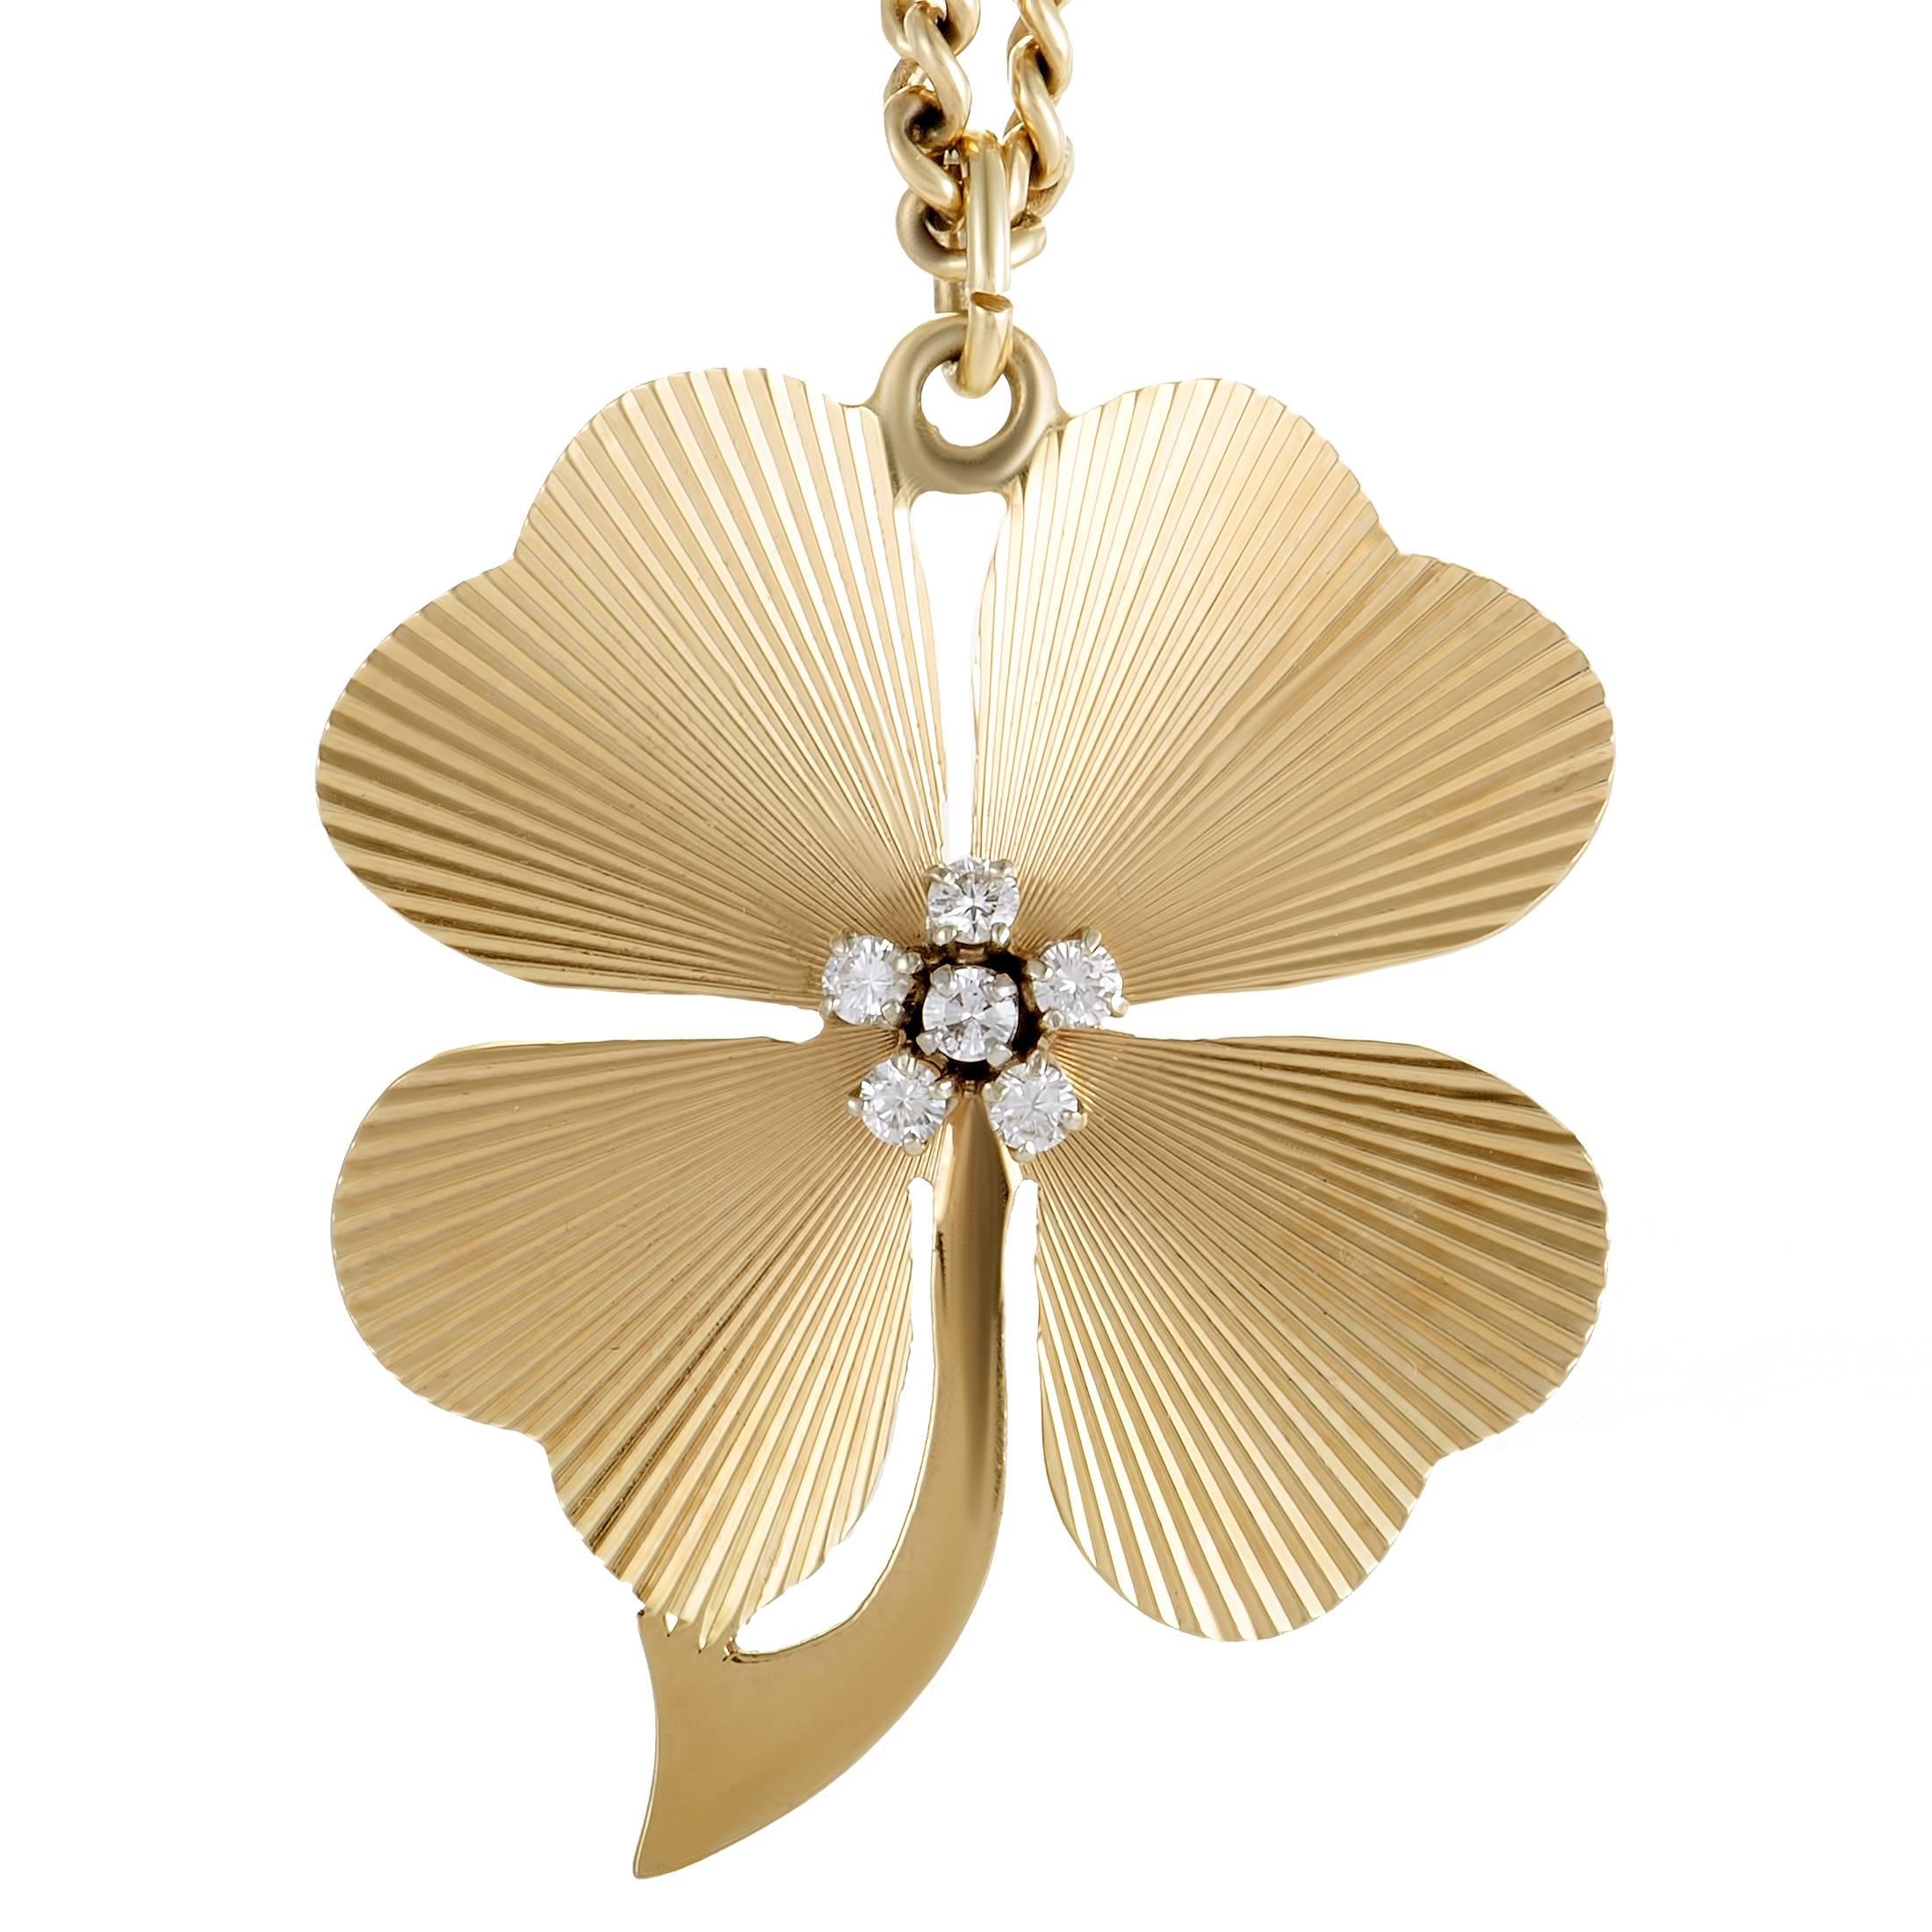 Boasting a remarkably designed and exquisitely crafted four-leaf clover that is believed to bring good luck, this adorable key chain designed by Tiffany & Co. offers exceptionally elegant and graceful appearance. It is made of stylish 14K yellow